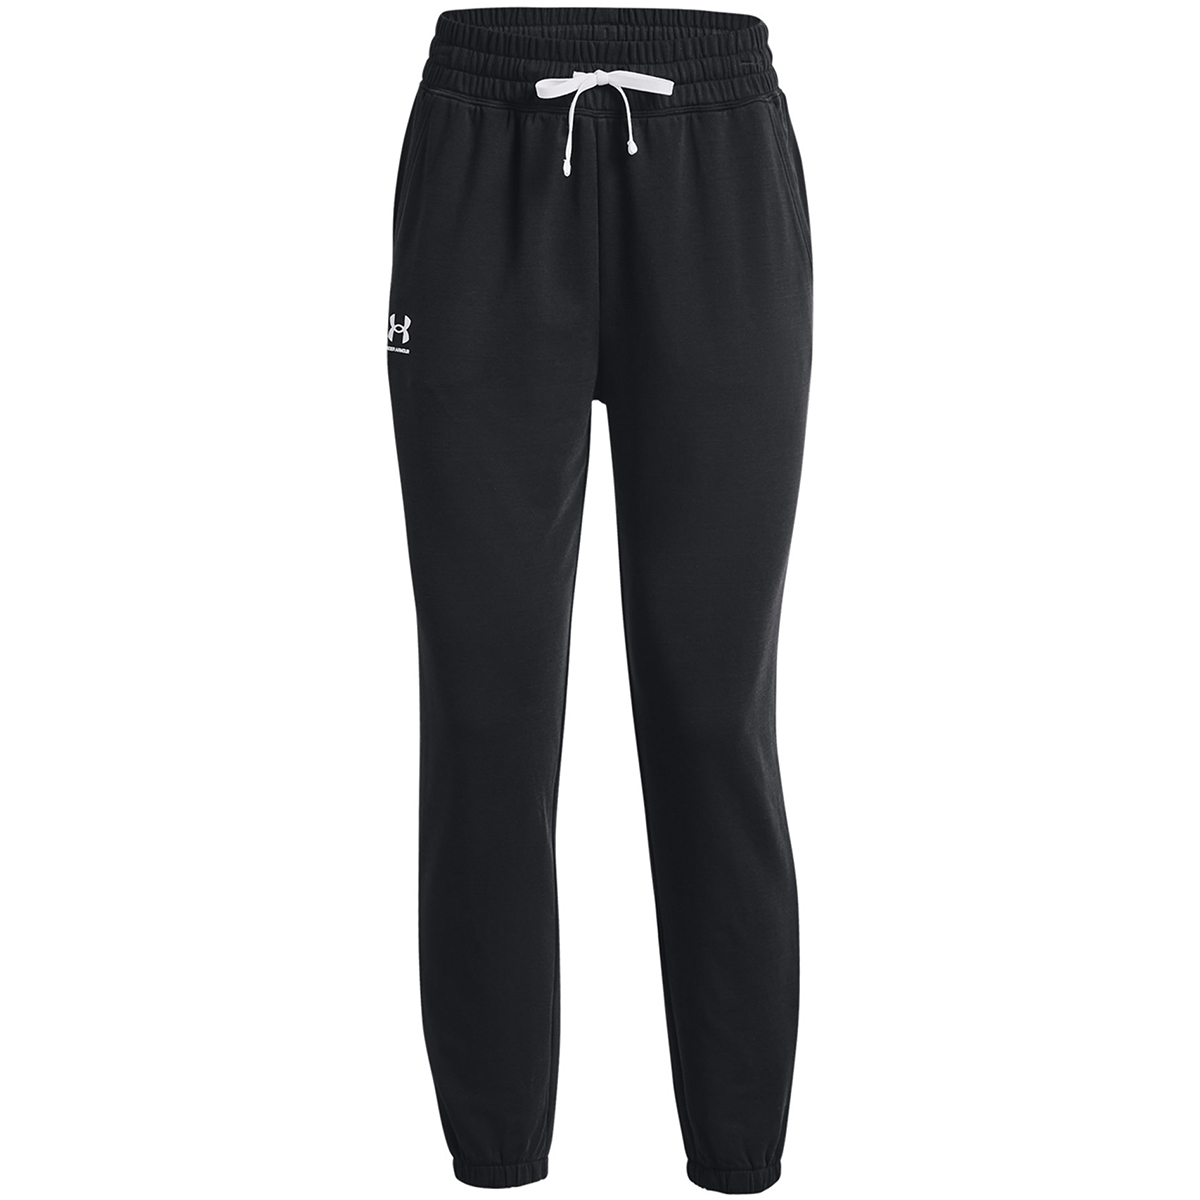 Under Armour Women's Ua Rival Terry Joggers, Black